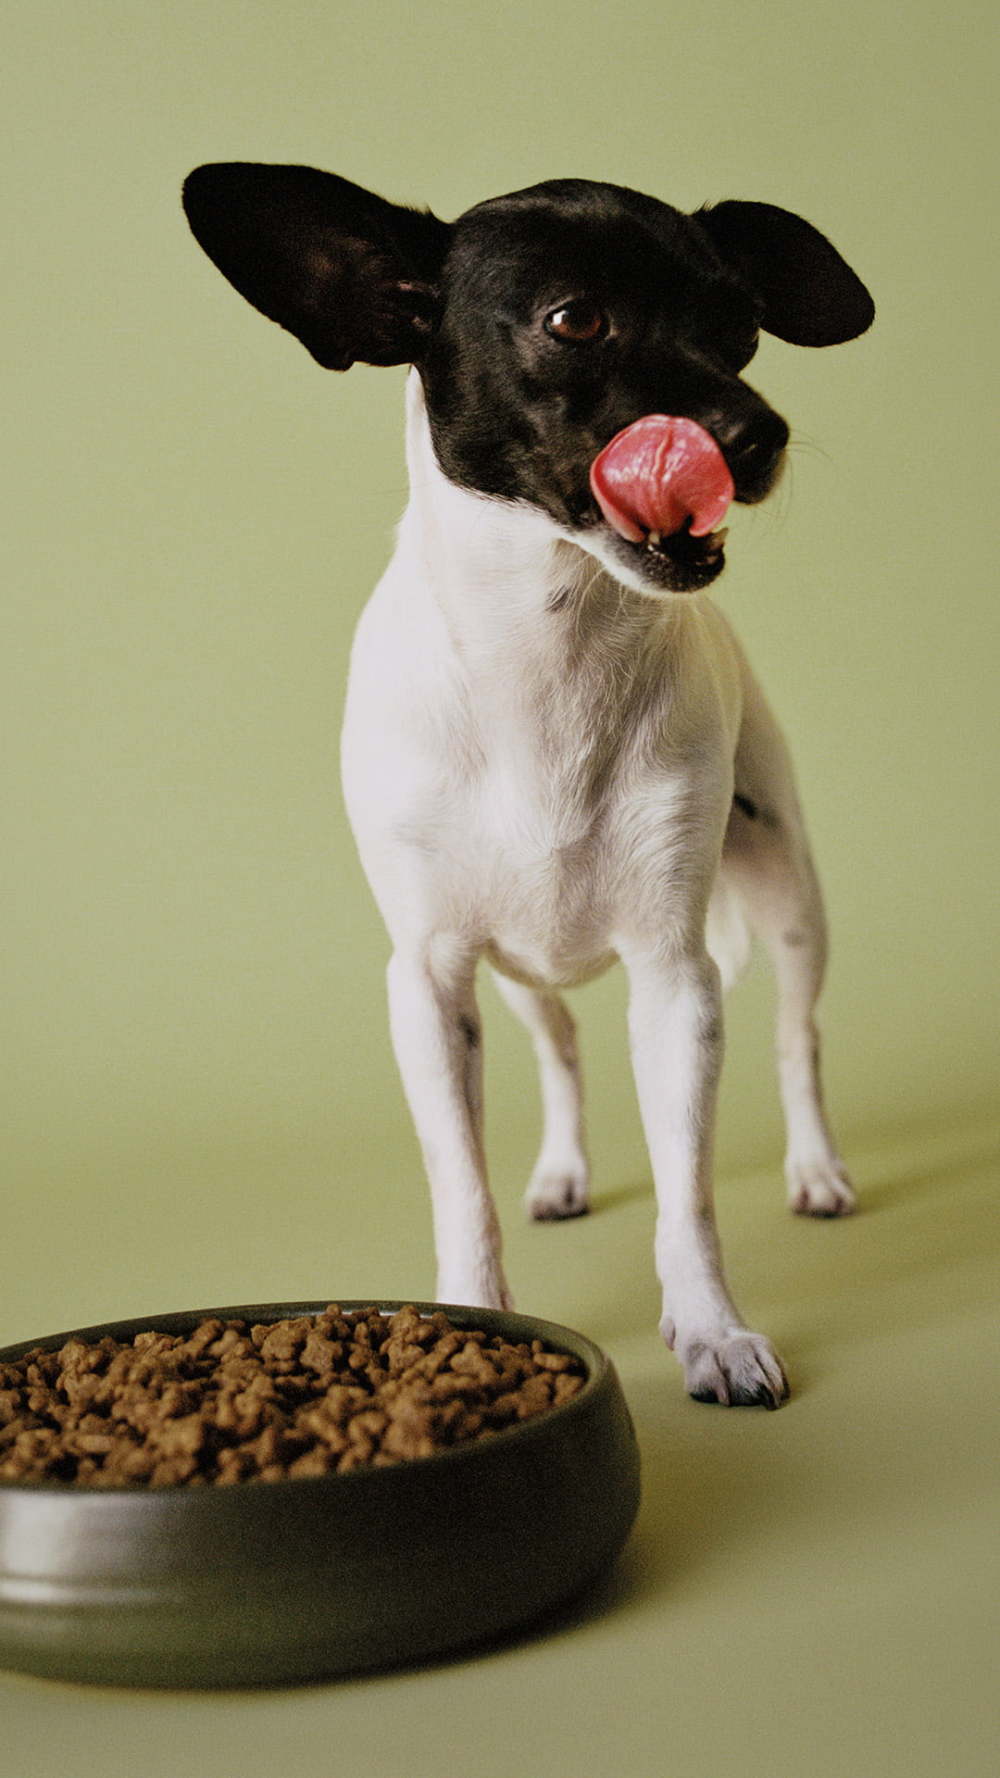 Dog licking lips with bowl of kibble